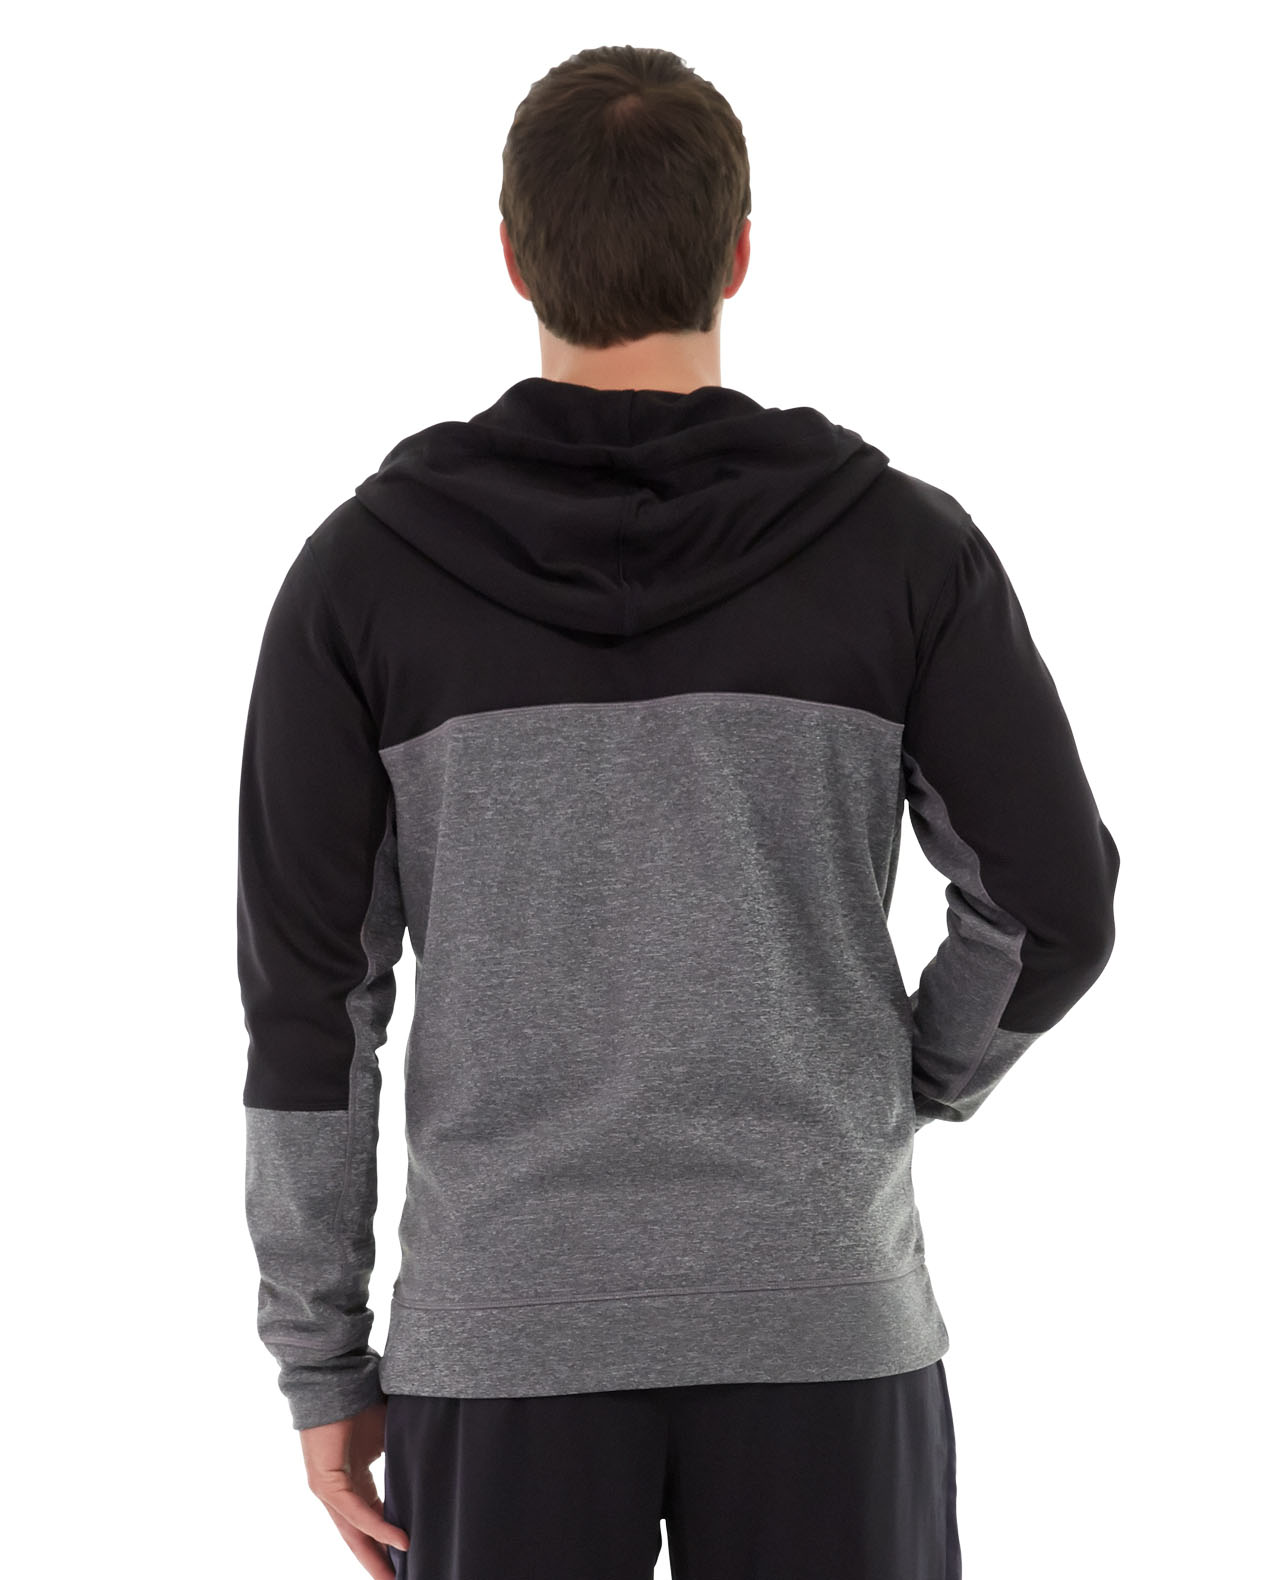 Teton Pullover Hoodie  (free shipping with highlighting)